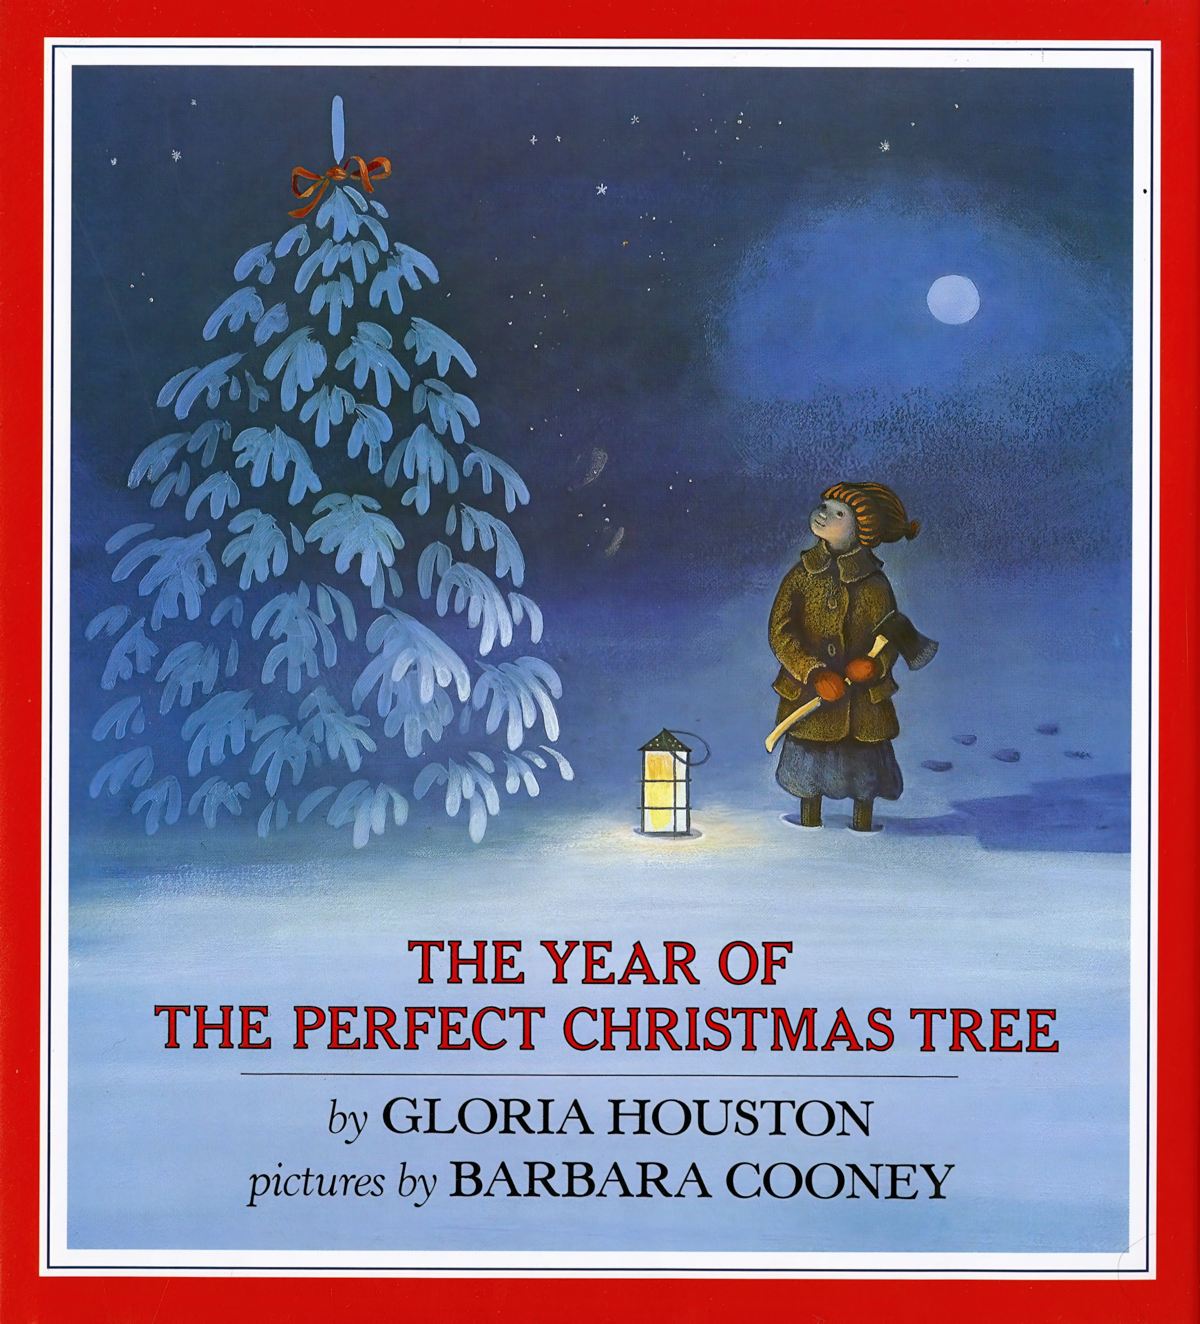 The Year Of The Perfect Christmas Tree by Gloria Houston and Barbara Cooney